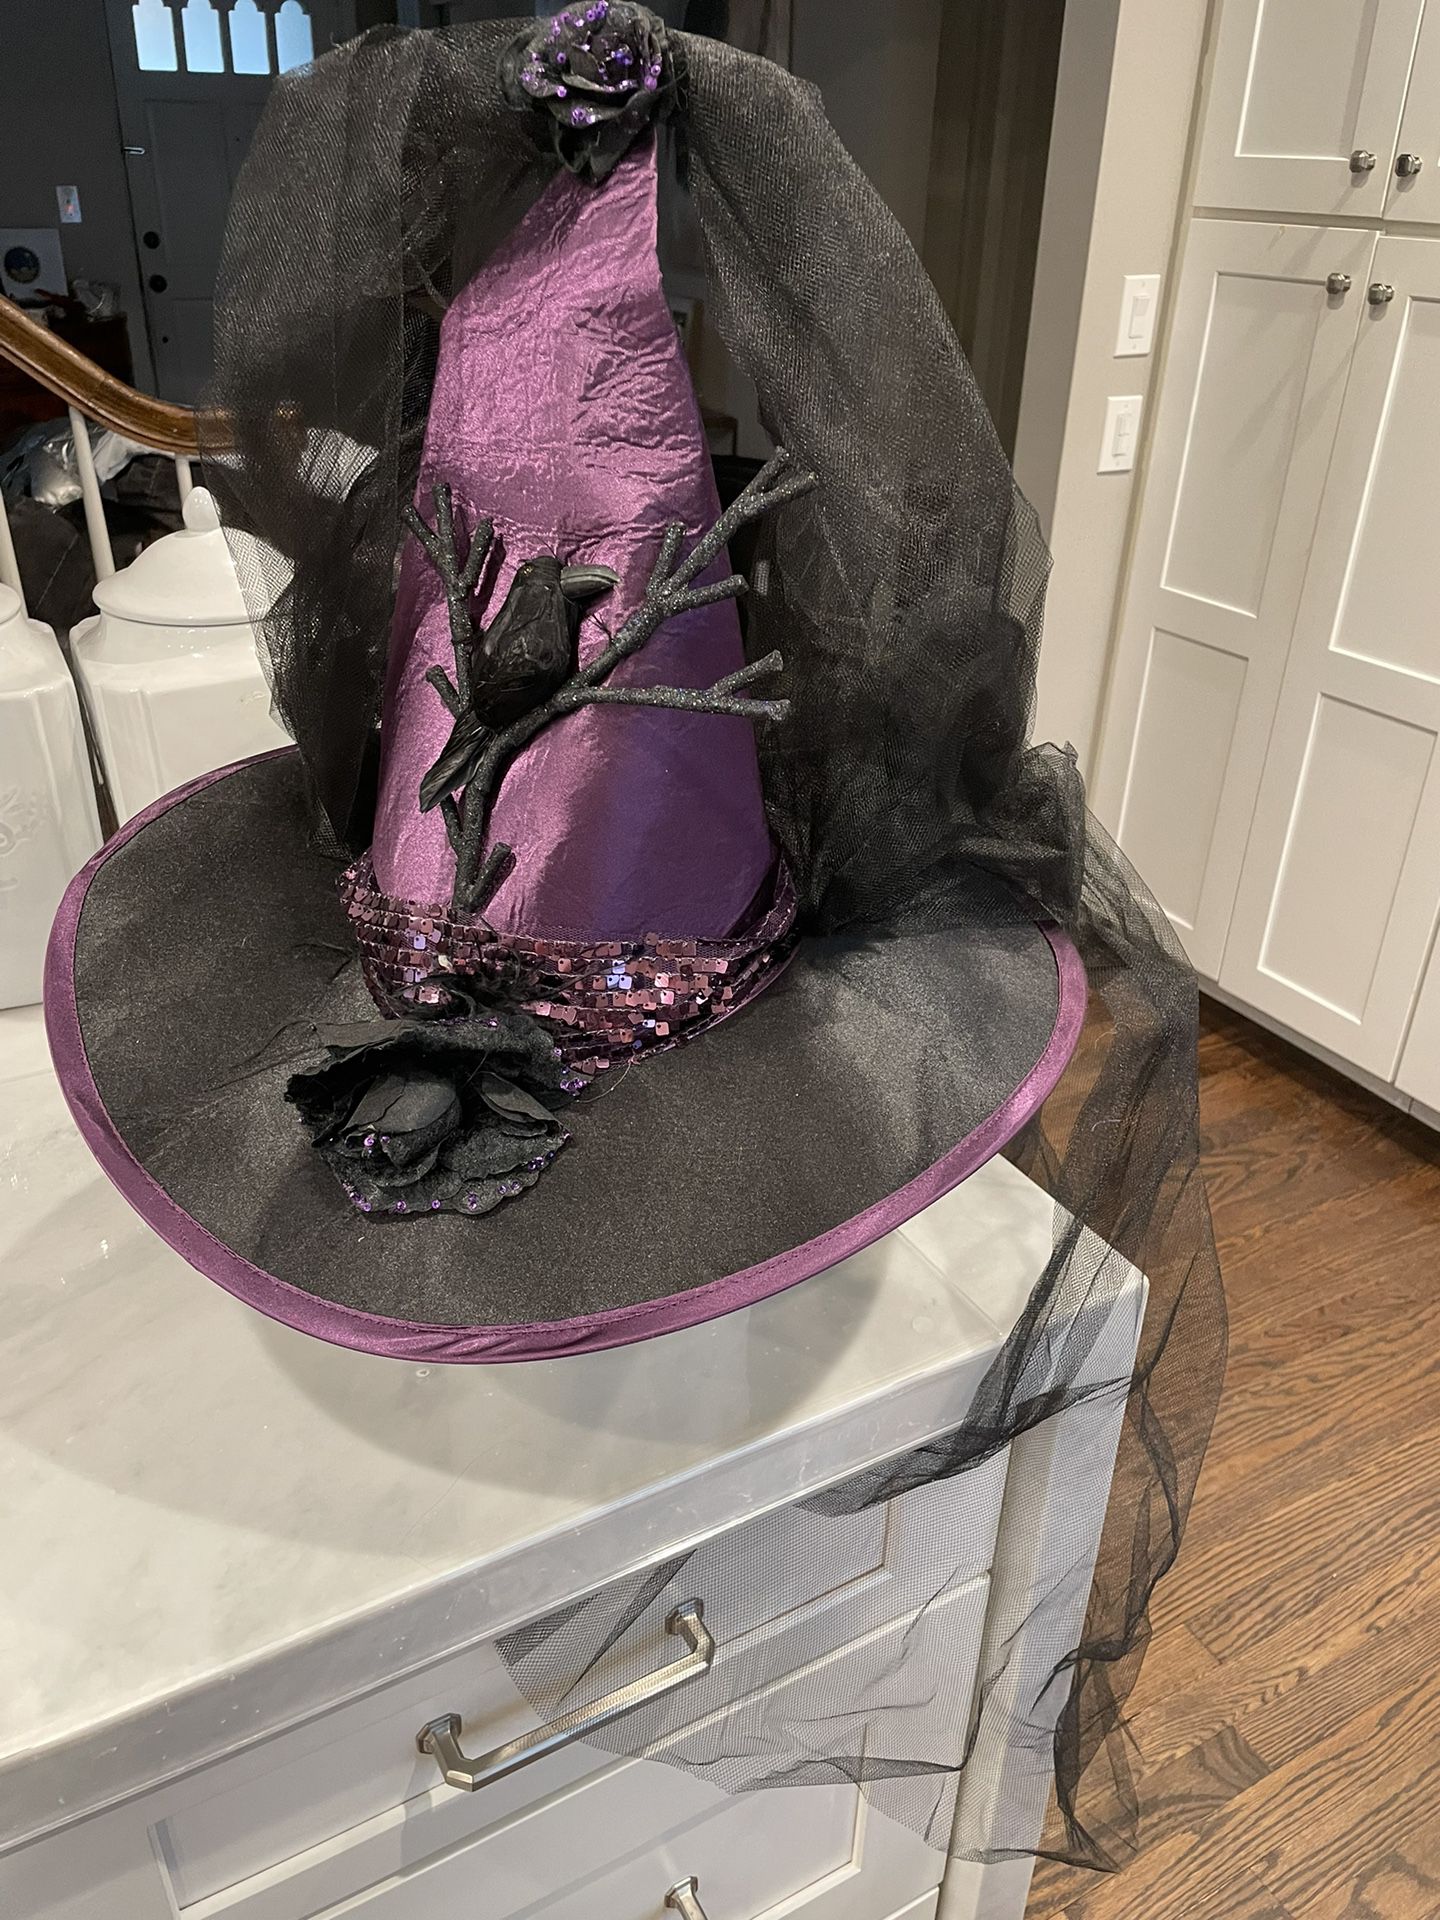 HUGE witch Hat With Ling 34” Tulle Veil Adjustable Inside Halloween Grandinroad Wizard Wicked